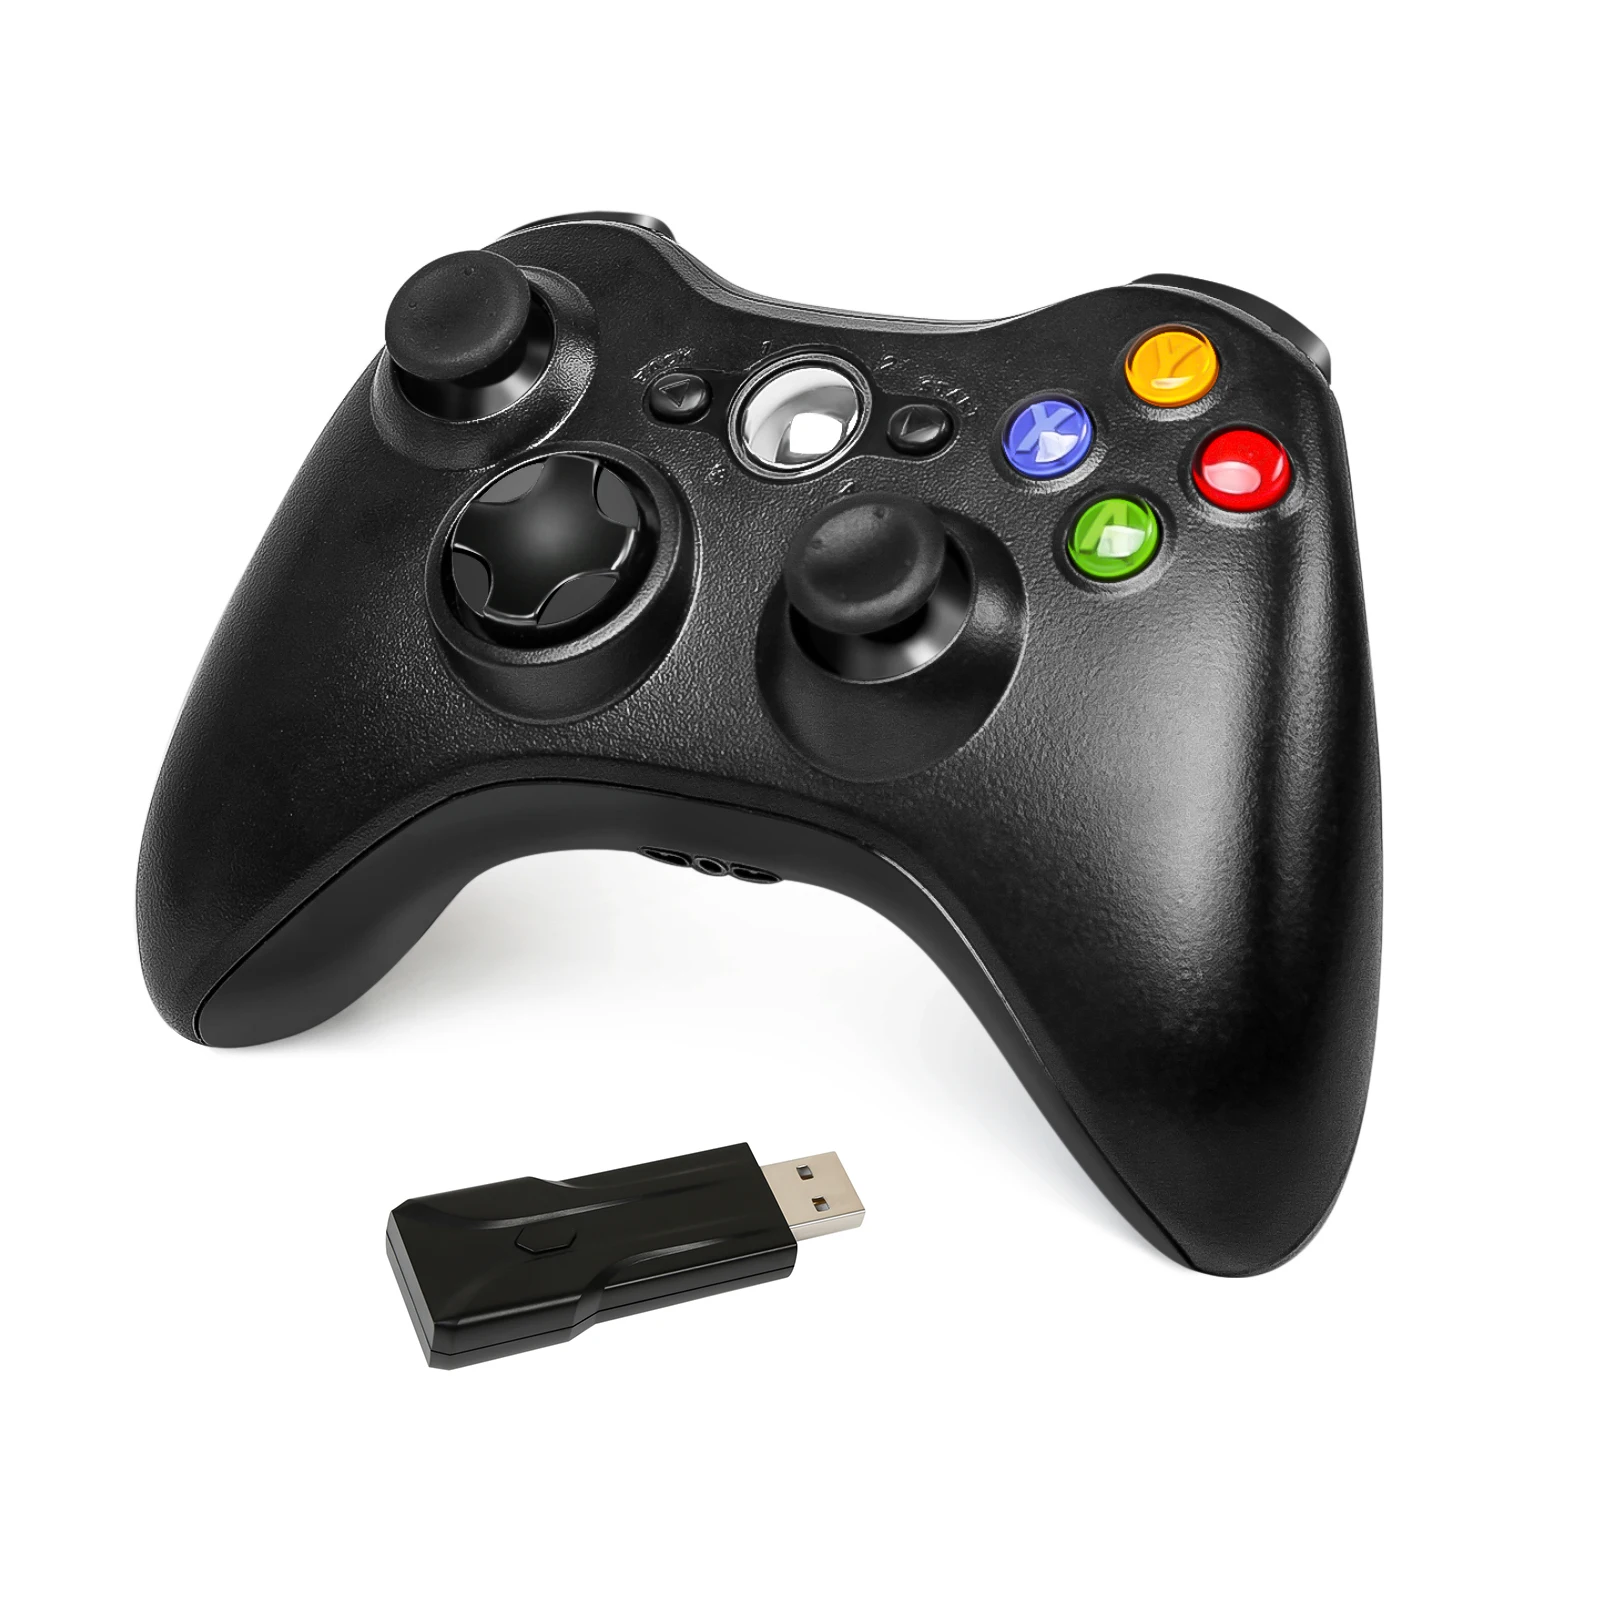 2.4G wireless Vibration Gamepad Joystick For PC Controller Compatible with Windows 7 8 10 Xbox series Joypad with high quality images - 6